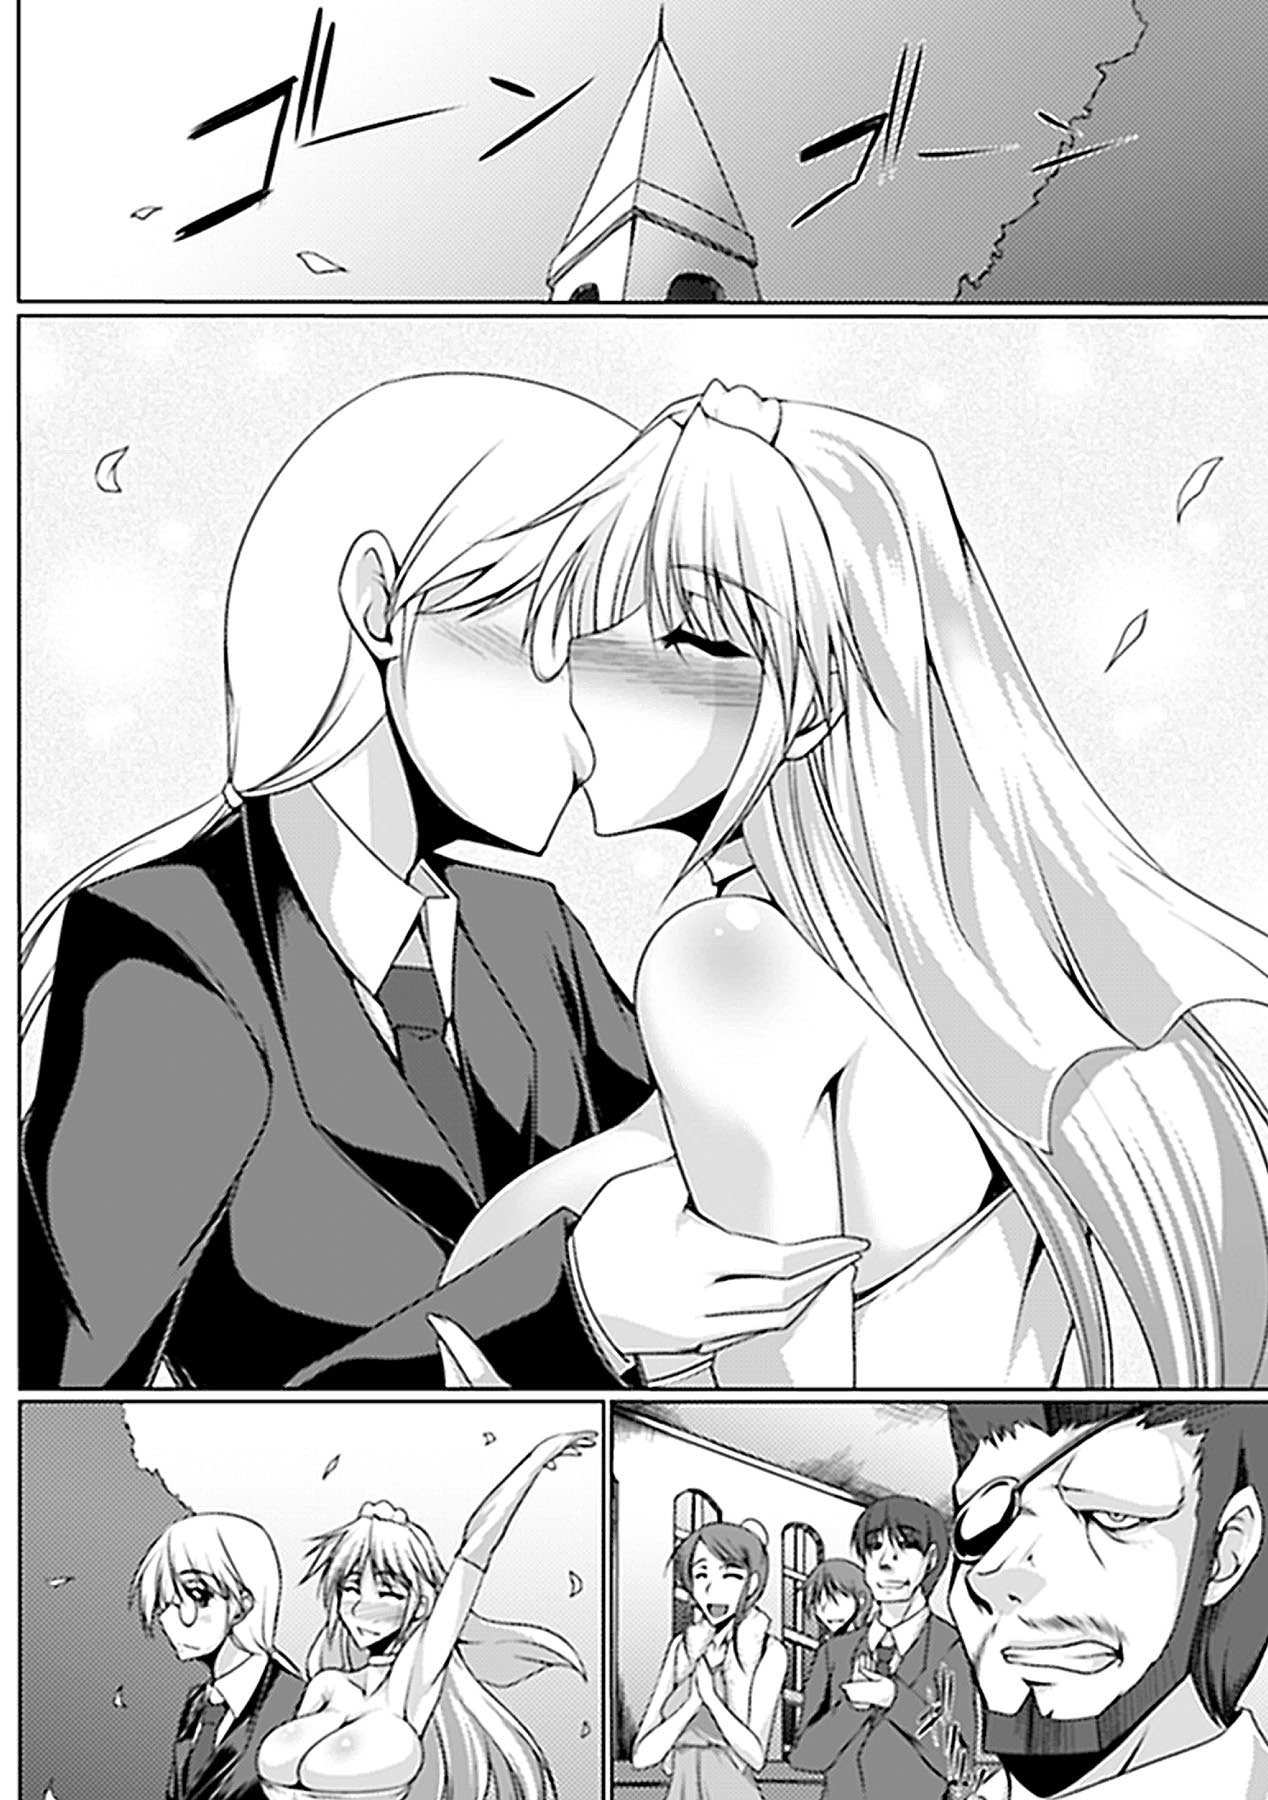 Stolen Military Princess [English] [Rewrite] page 1 full